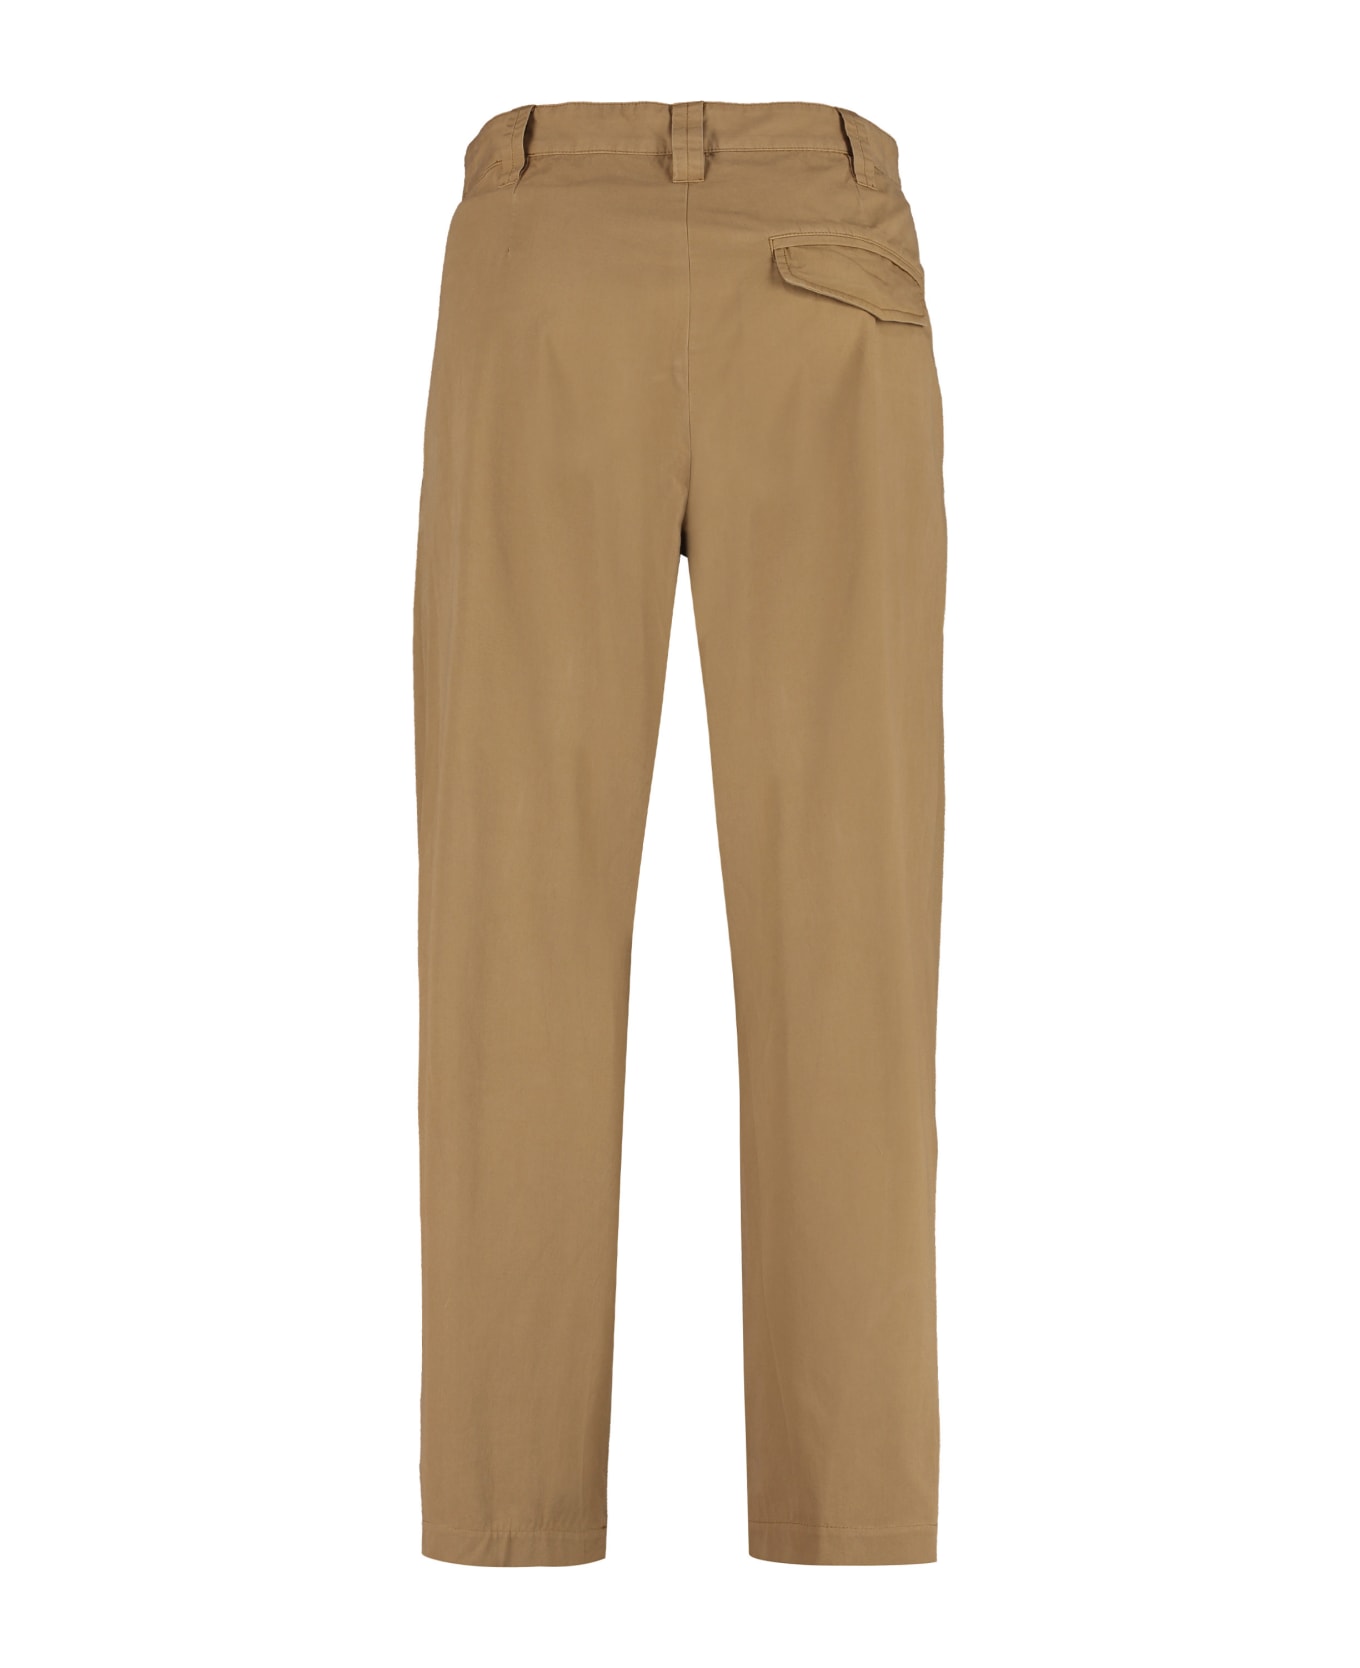 A.P.C. Cotton Chino Trousers - Cag Tabac